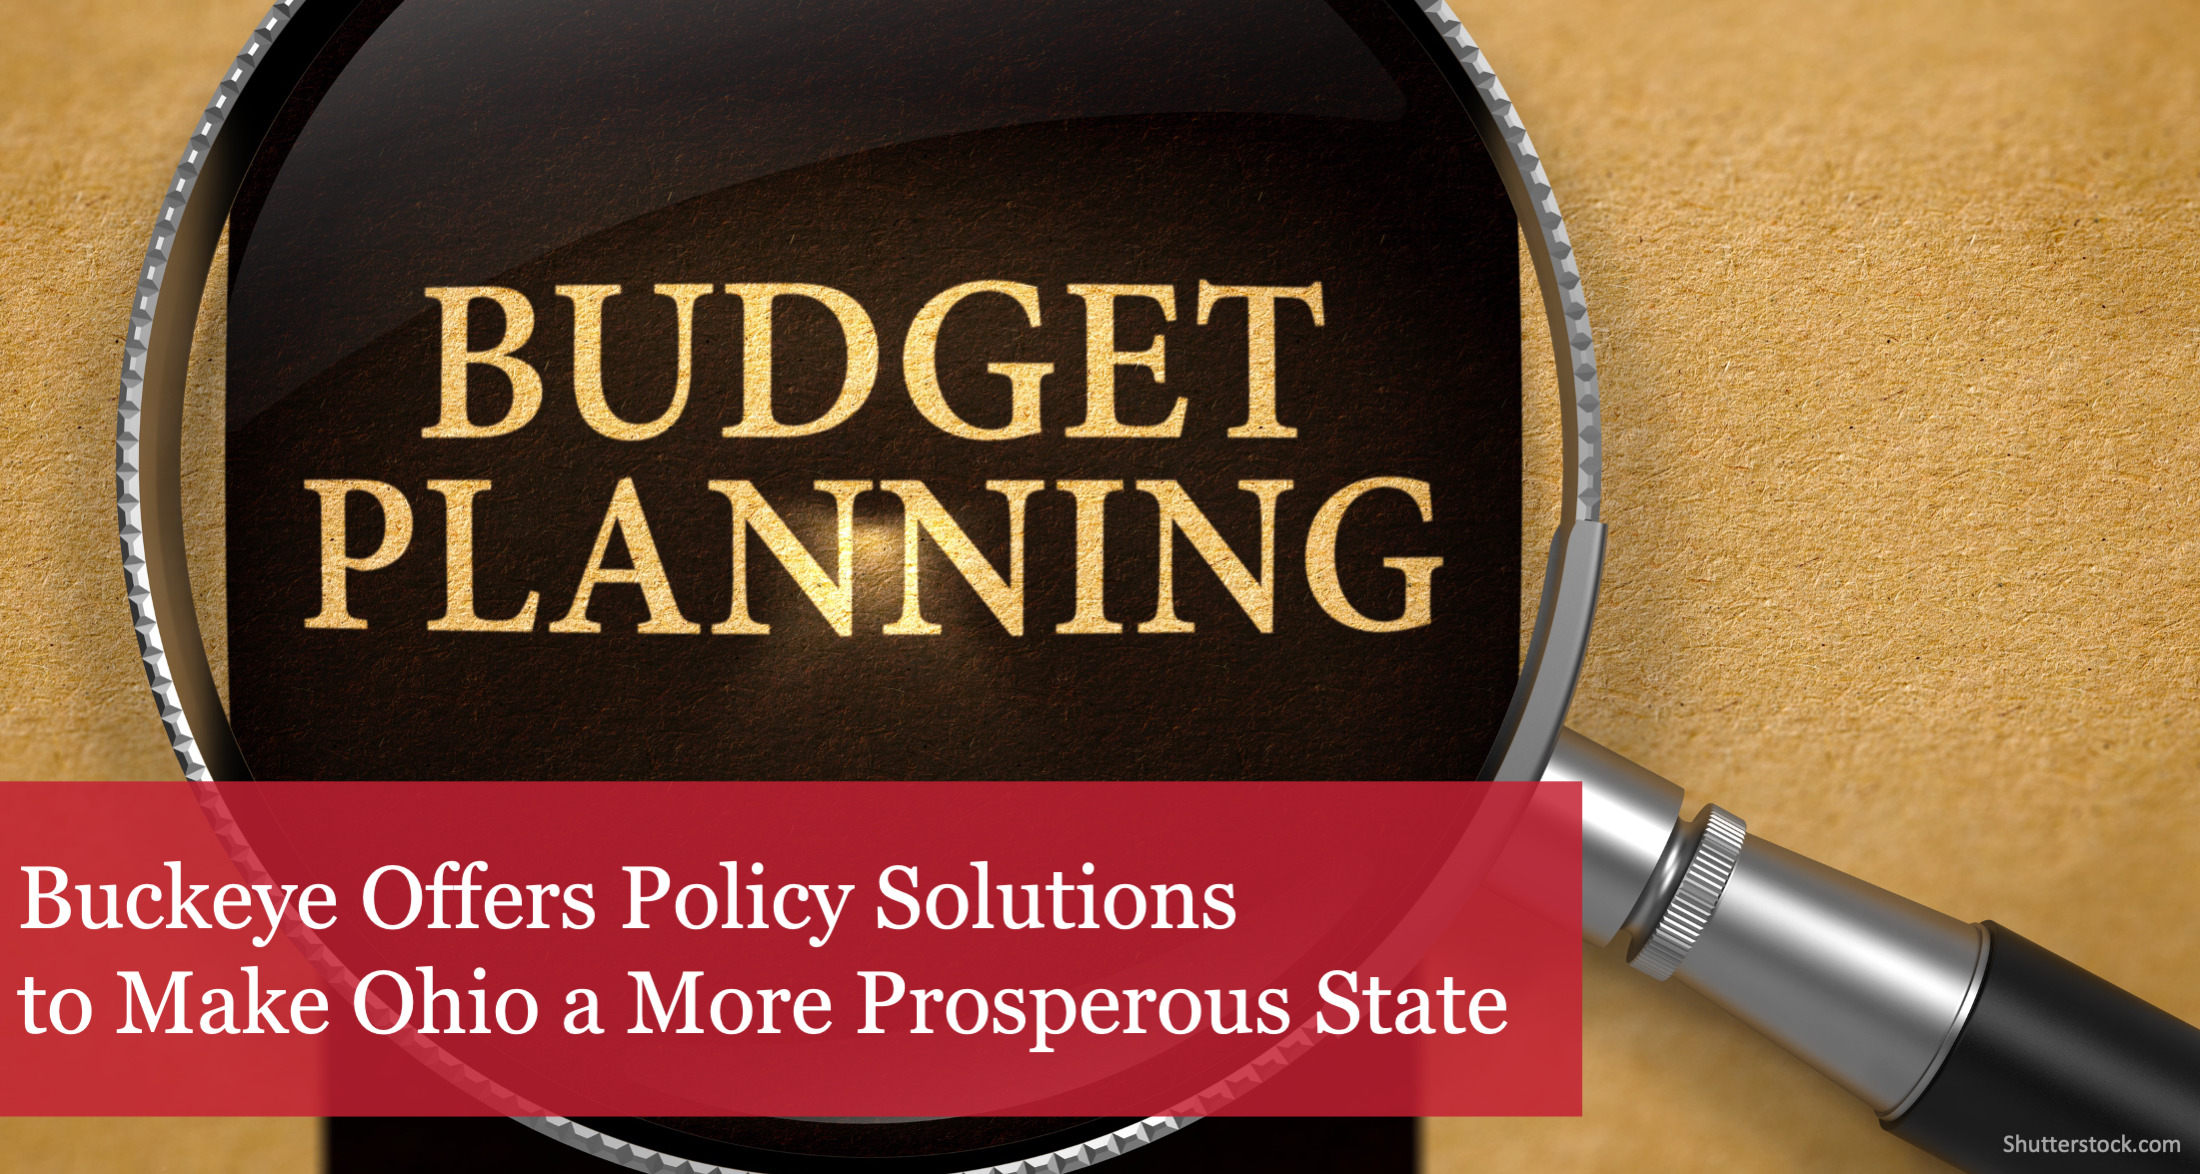 The Buckeye Institute Offers Policy Solutions to Make Ohio a More Prosperous State